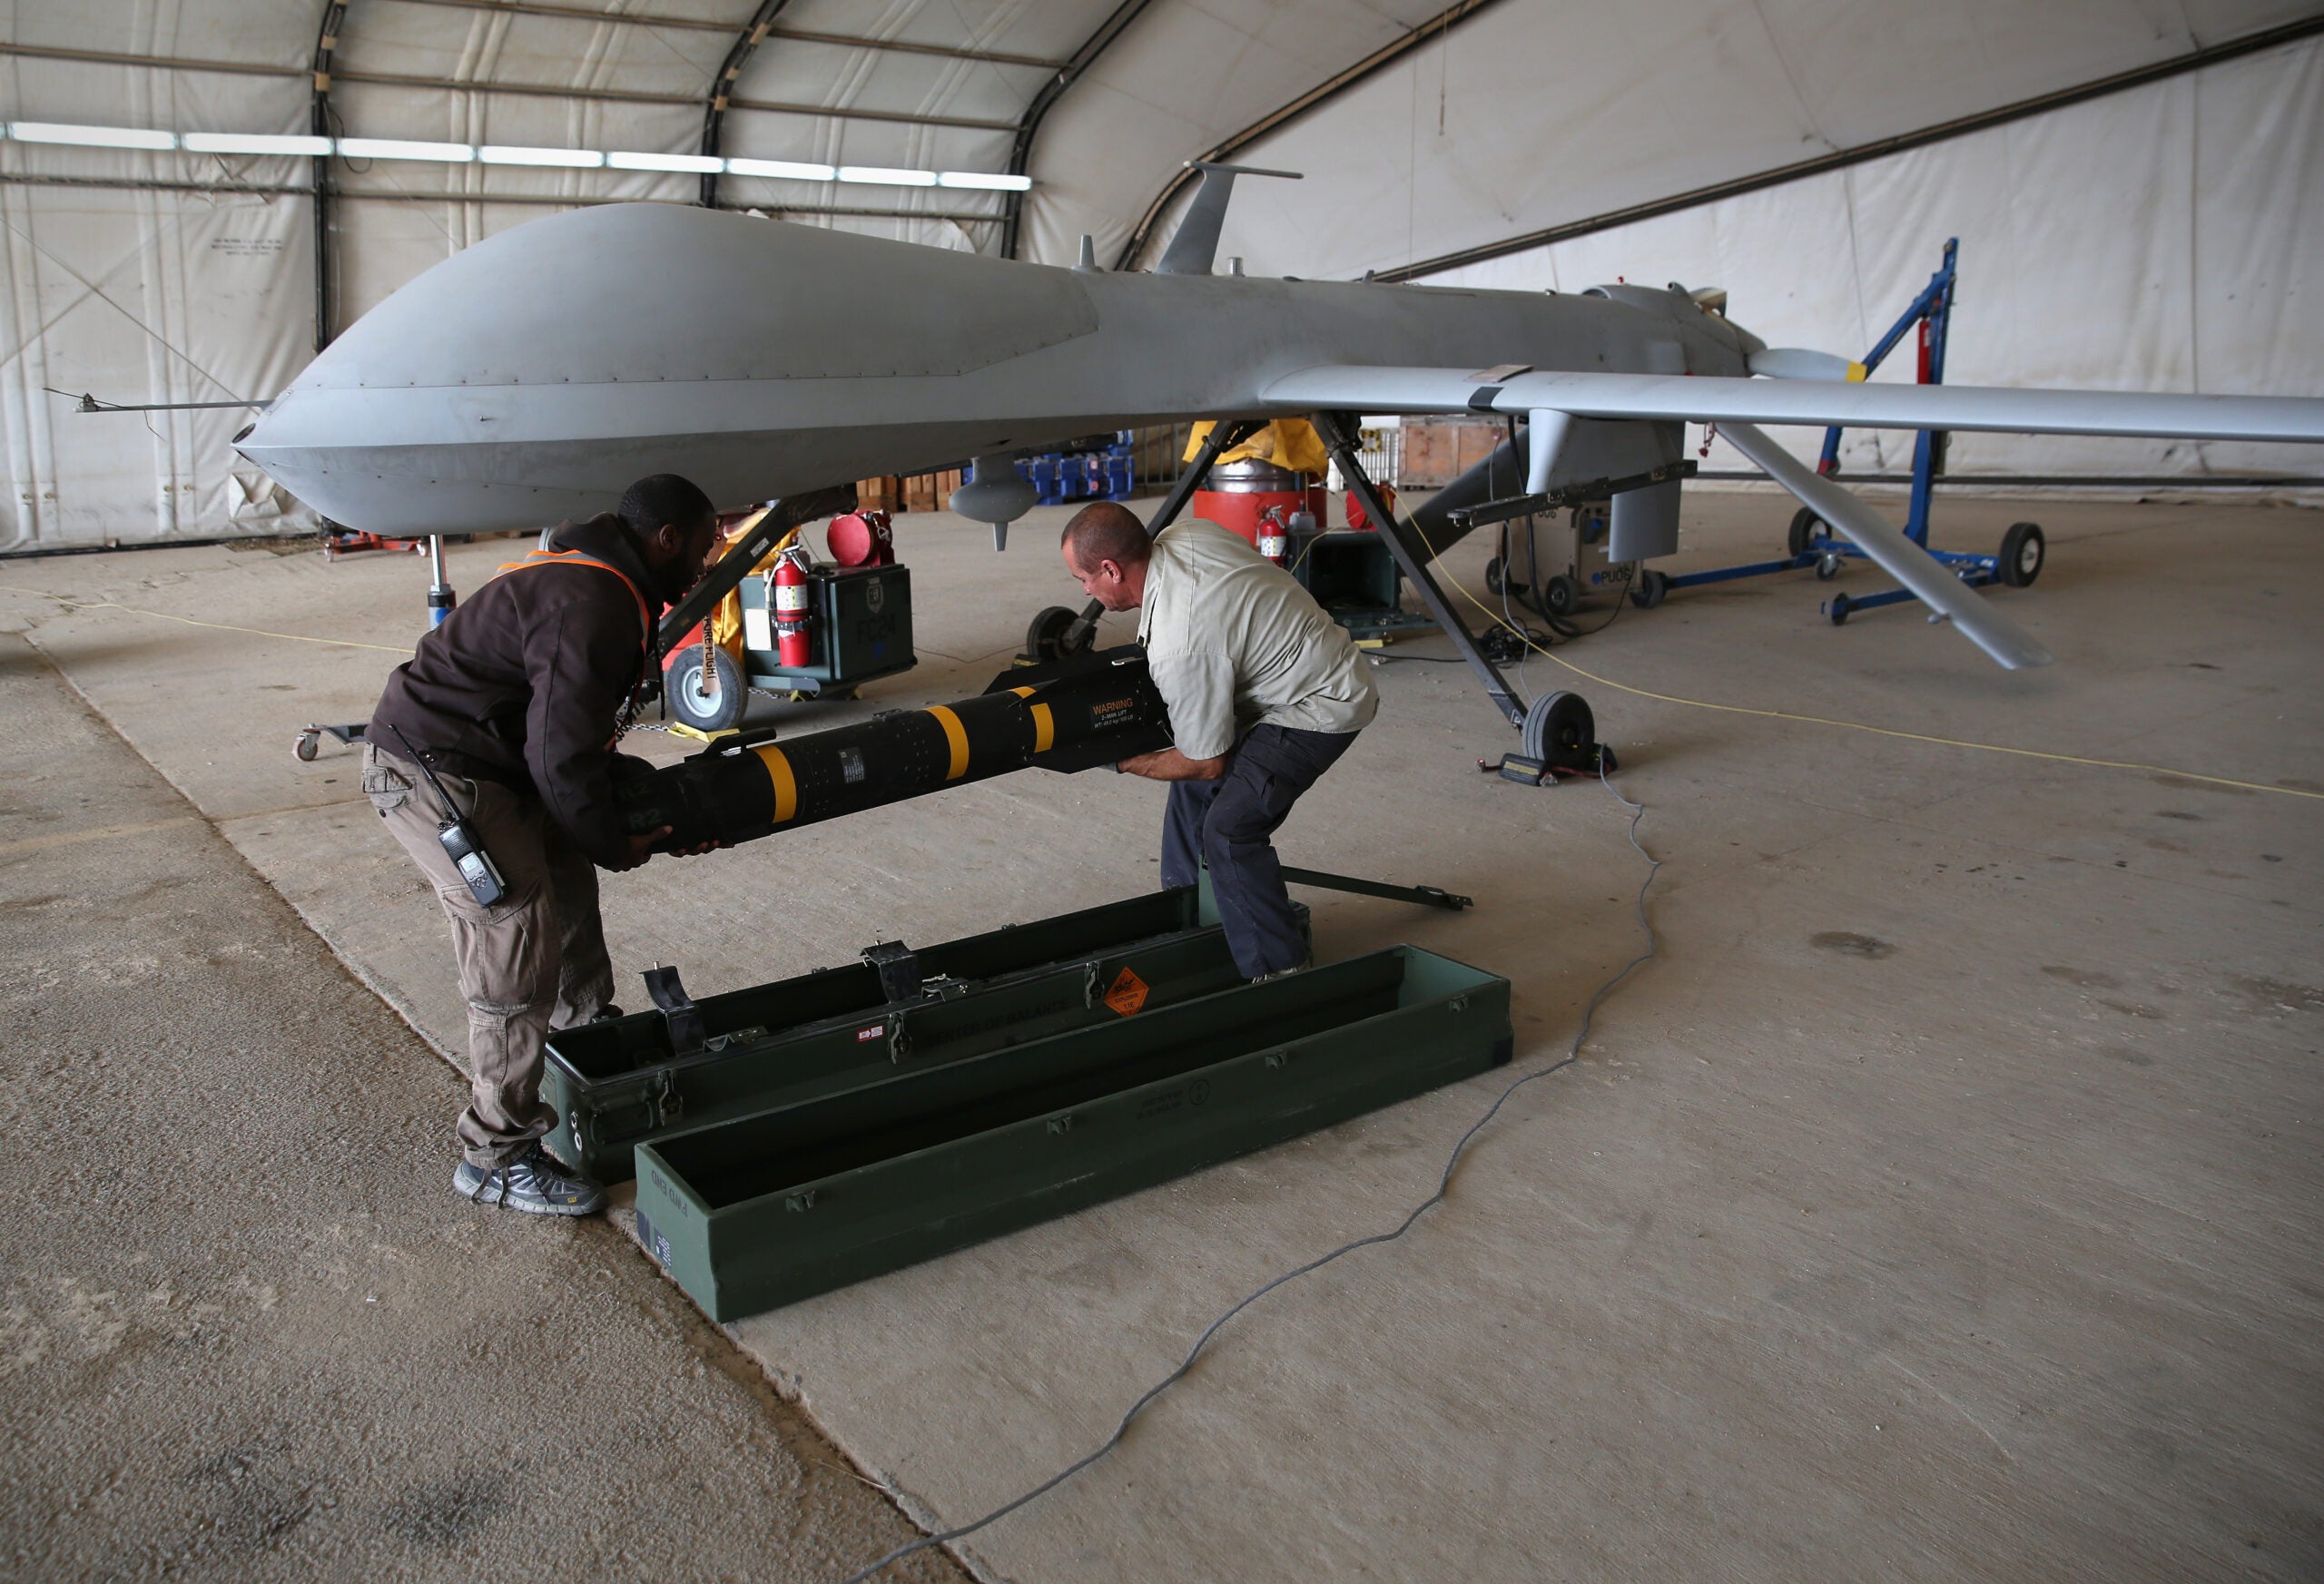 UNSPECIFIED, UNSPECIFIED - JANUARY 07:  Contract workers load a Hellfire missile onto a U.S. Air Force MQ-1B Predator unmanned aerial vehicle (UAV), at a secret air base in the Persian Gulf region on January 7, 2016. The U.S. military and coalition forces use the base, located in an undisclosed location, to launch drone airstrikes against ISIL in Iraq and Syria, as well as to distribute cargo and transport troops supporting Operation Inherent Resolve. The Predators at the base are operated and maintained by the 46th Expeditionary Reconnaissance Squadron, currently attached to the 386th Air Expeditionary Wing.  (Photo by John Moore/Getty Images)